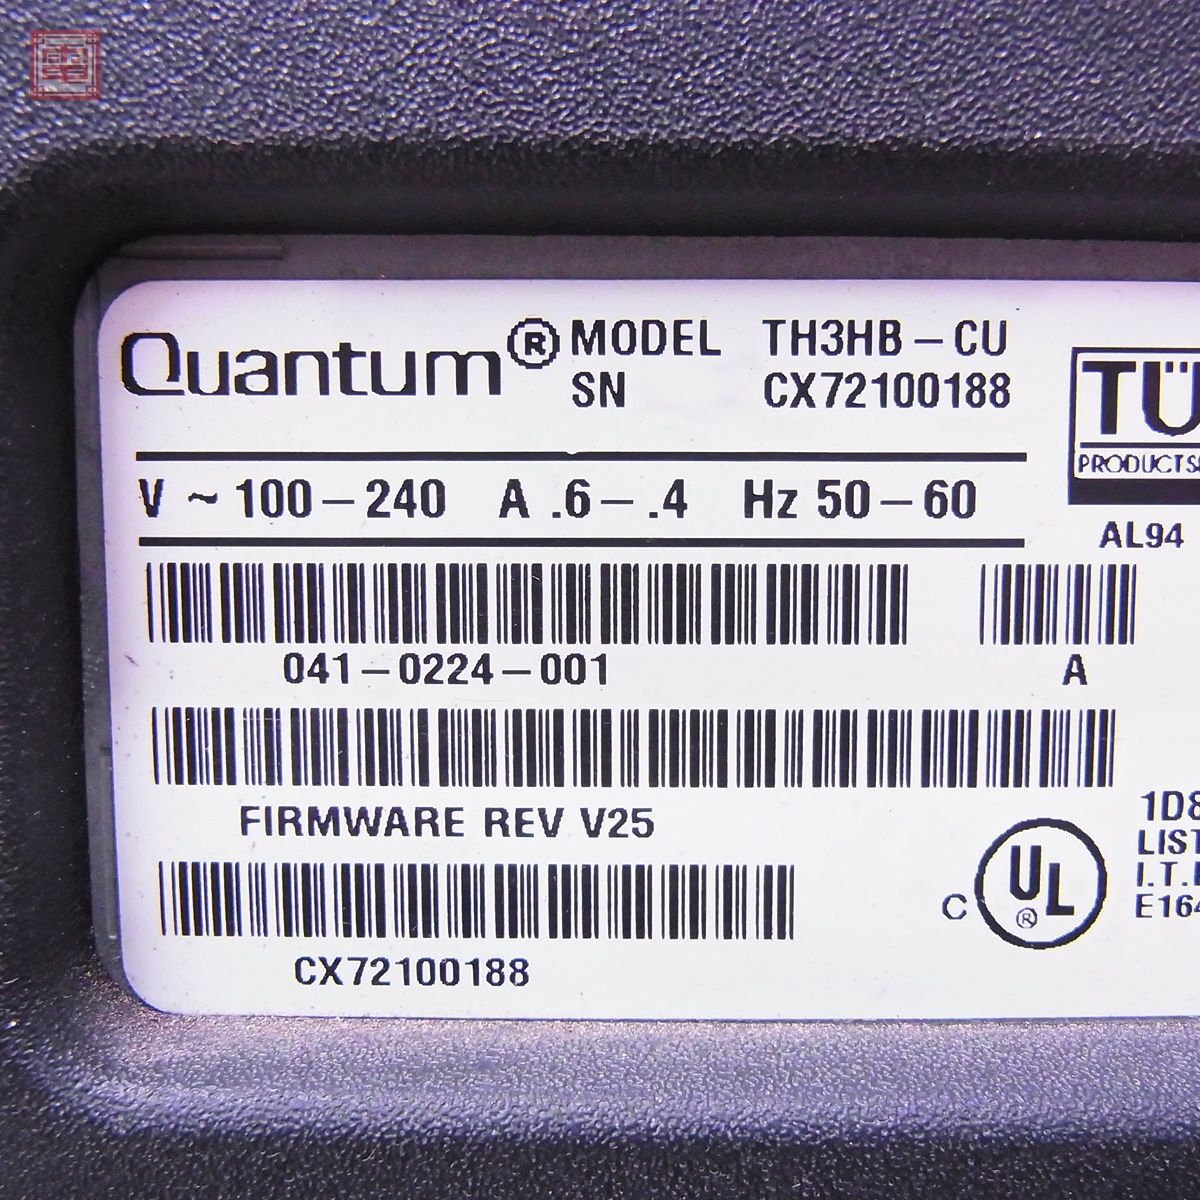 Quantum tape drive DLT 2500 XT (TH3HB-CU) tape Library TAPE DRIVE LIBRARYk on tam electrification only verification parts taking .. please [40